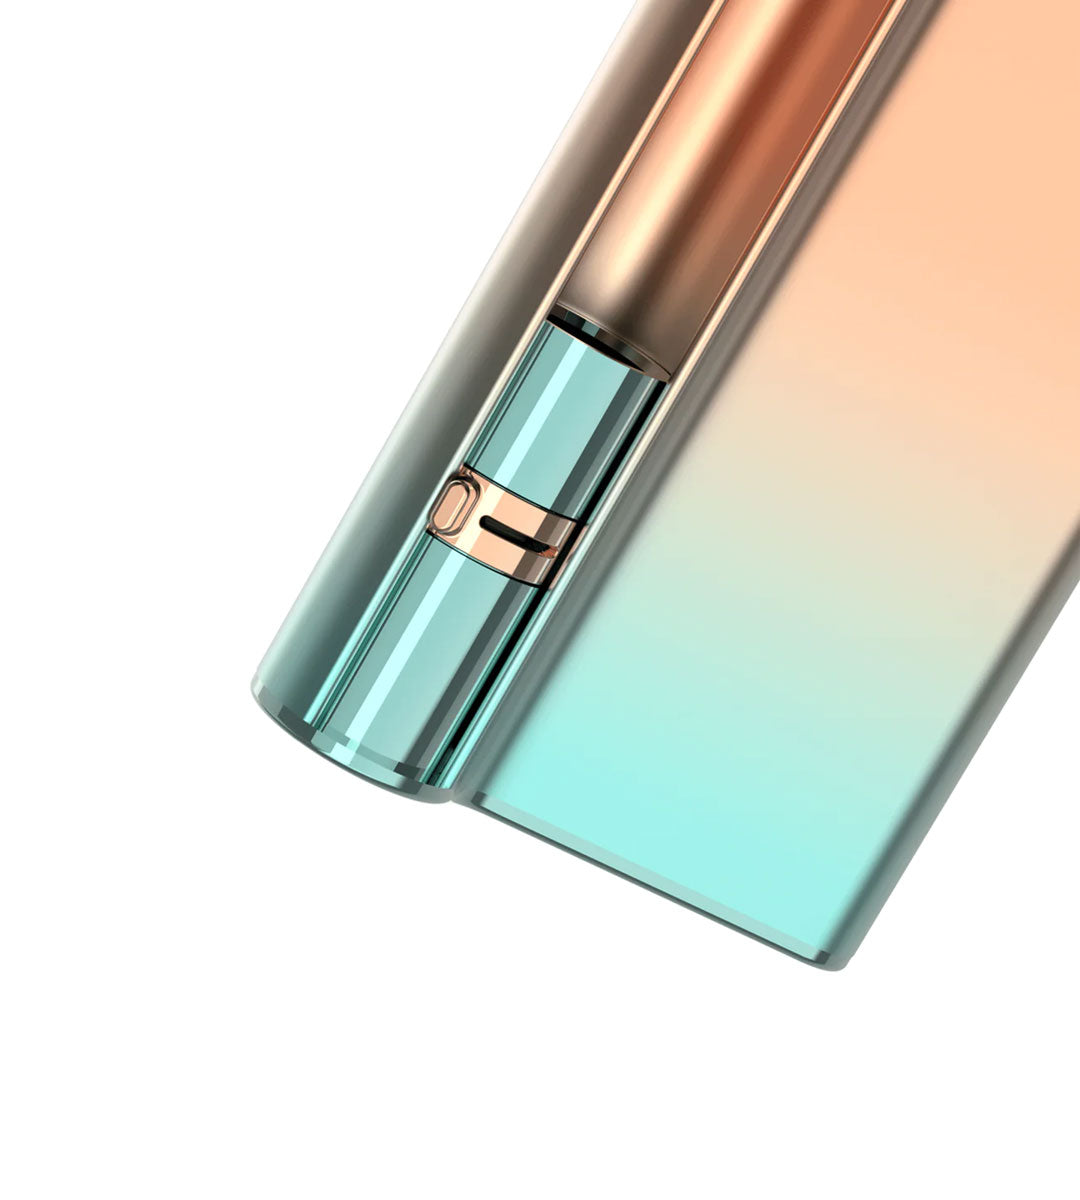 CCELL Palm Pro Battery airflow control tab